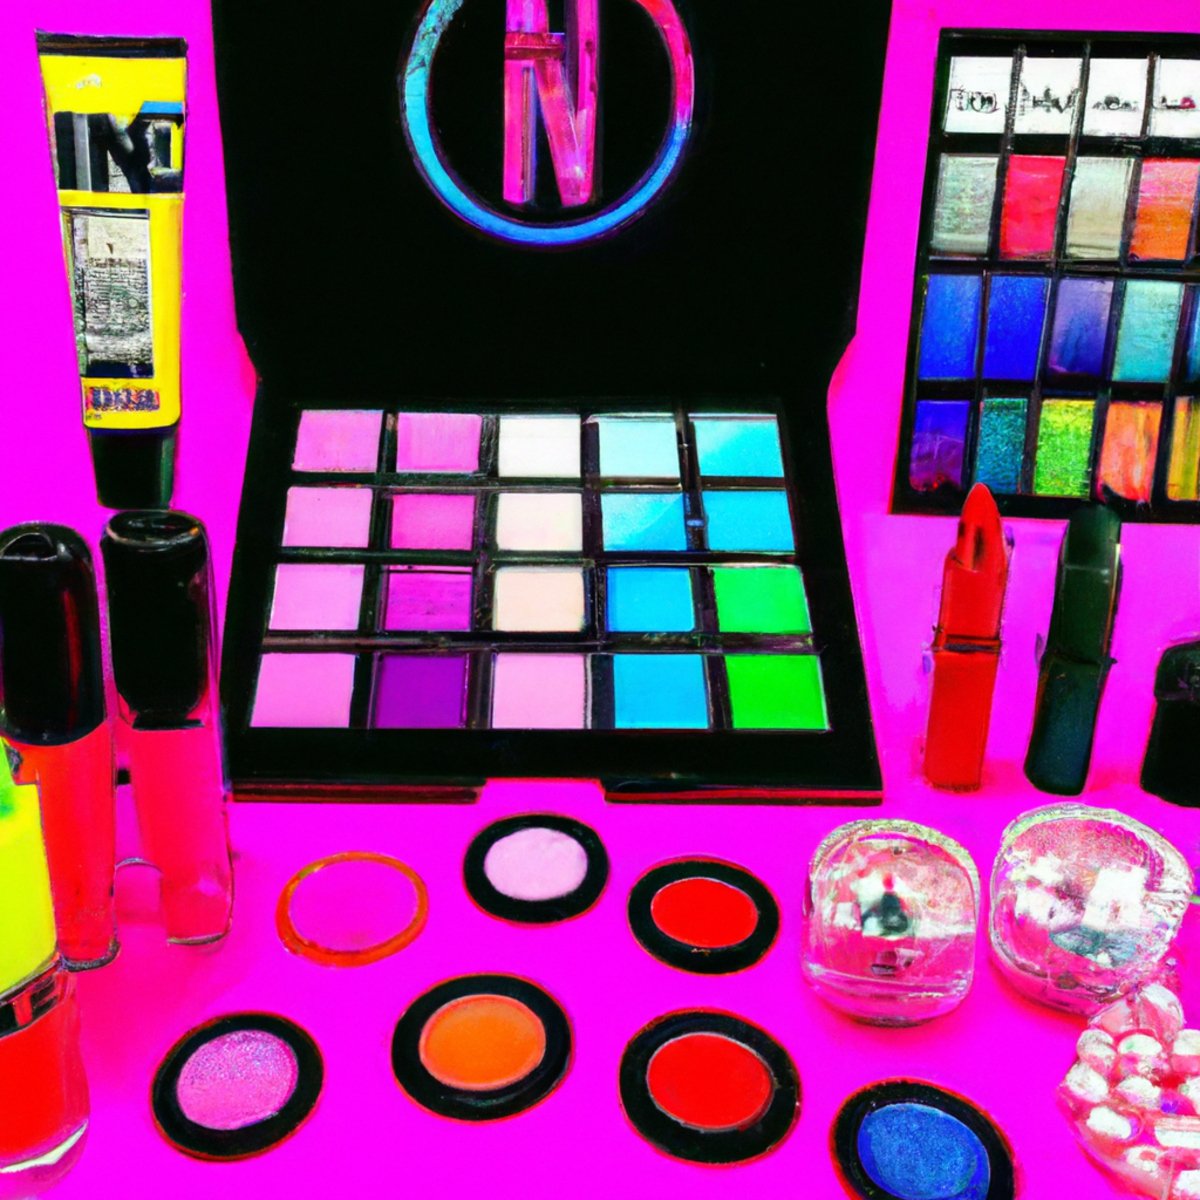 Vibrant neon makeup table with eyeshadow palette, lipsticks, brushes, and mirror, surrounded by neon signs.